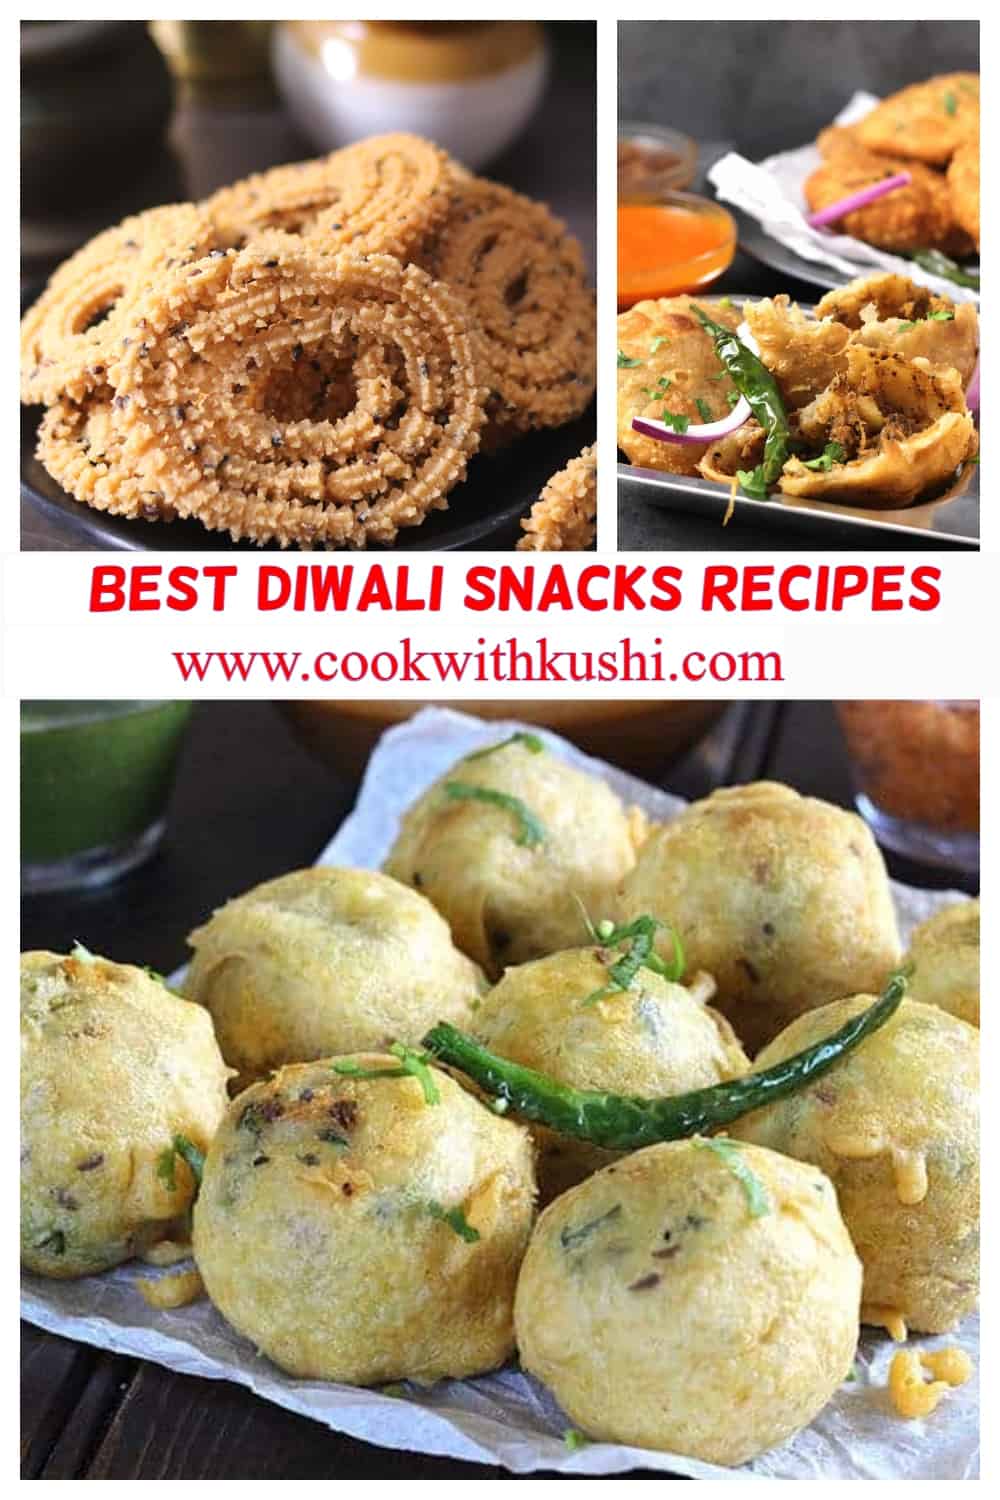 Diwali party snack ideas that include chaats, namkeens, paneer, aloo recipes